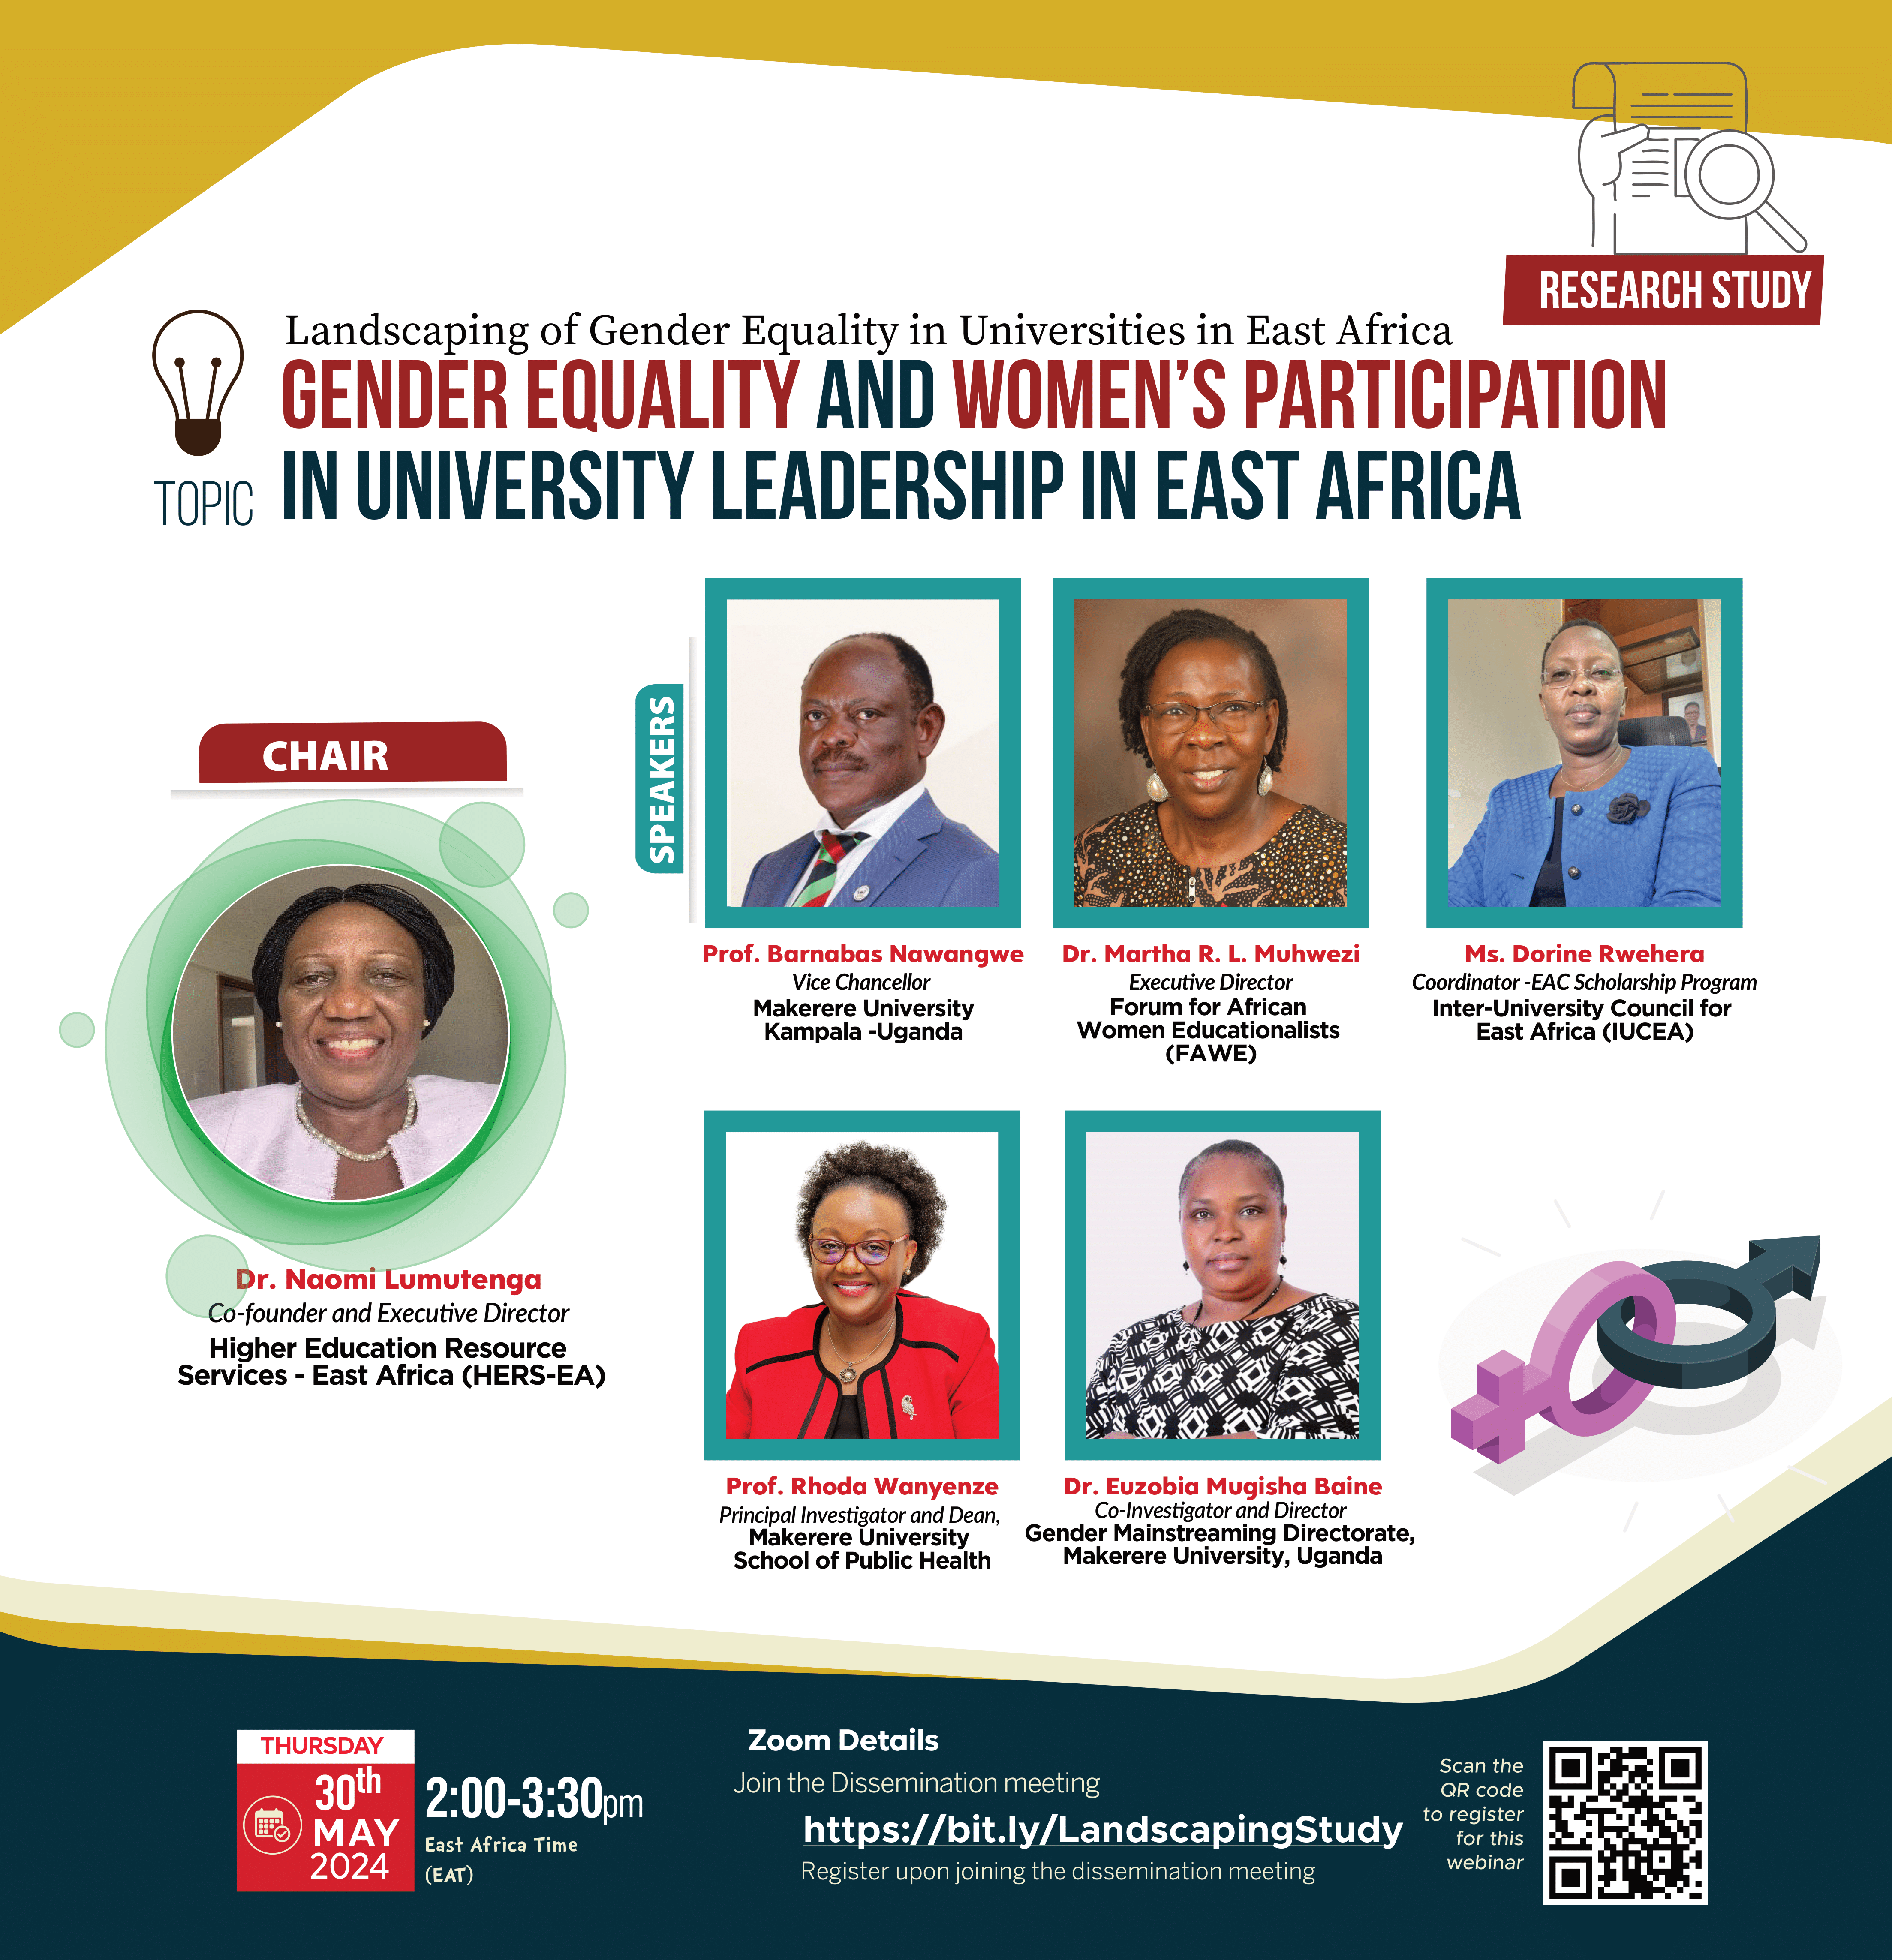 Virtual Dissemination | Landscaping of Gender Equality in Universities in East Africa